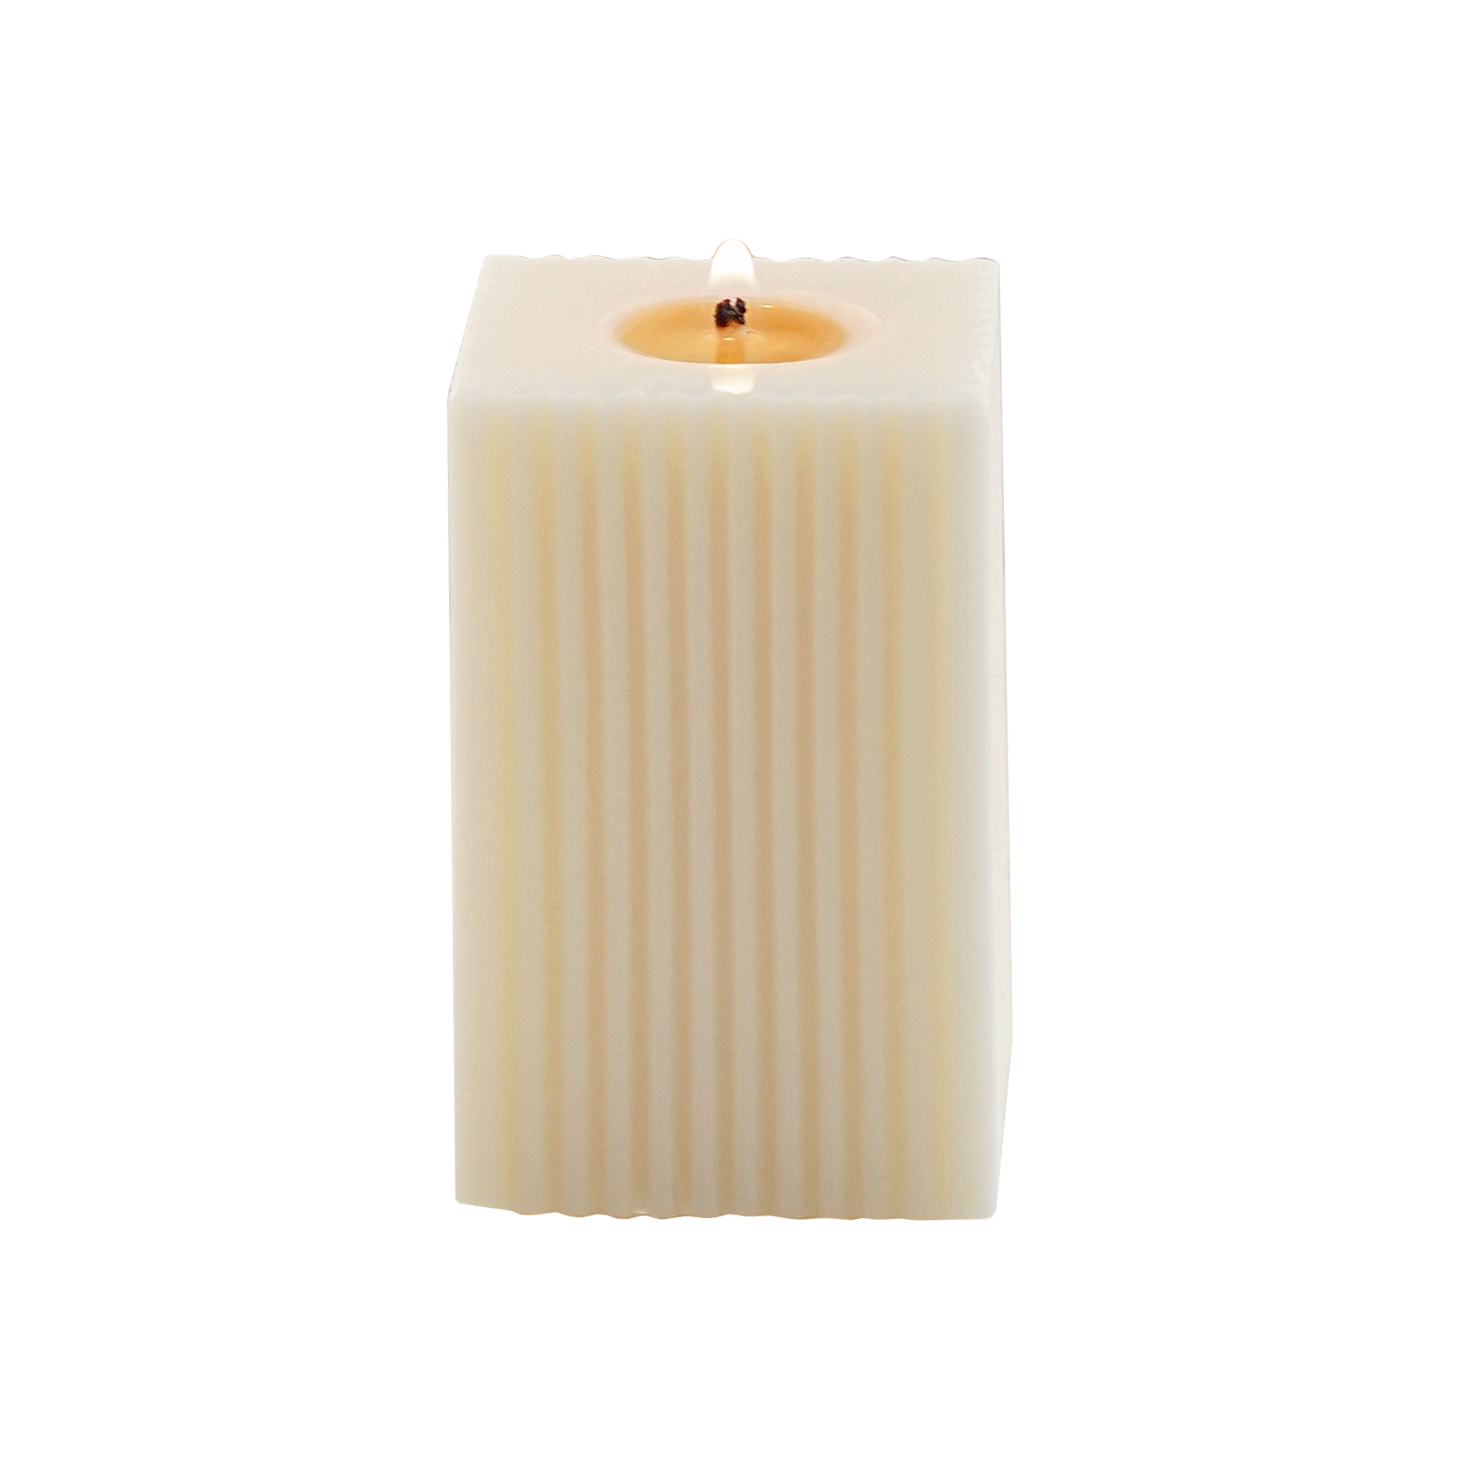 a lit ribbed square pillar candle